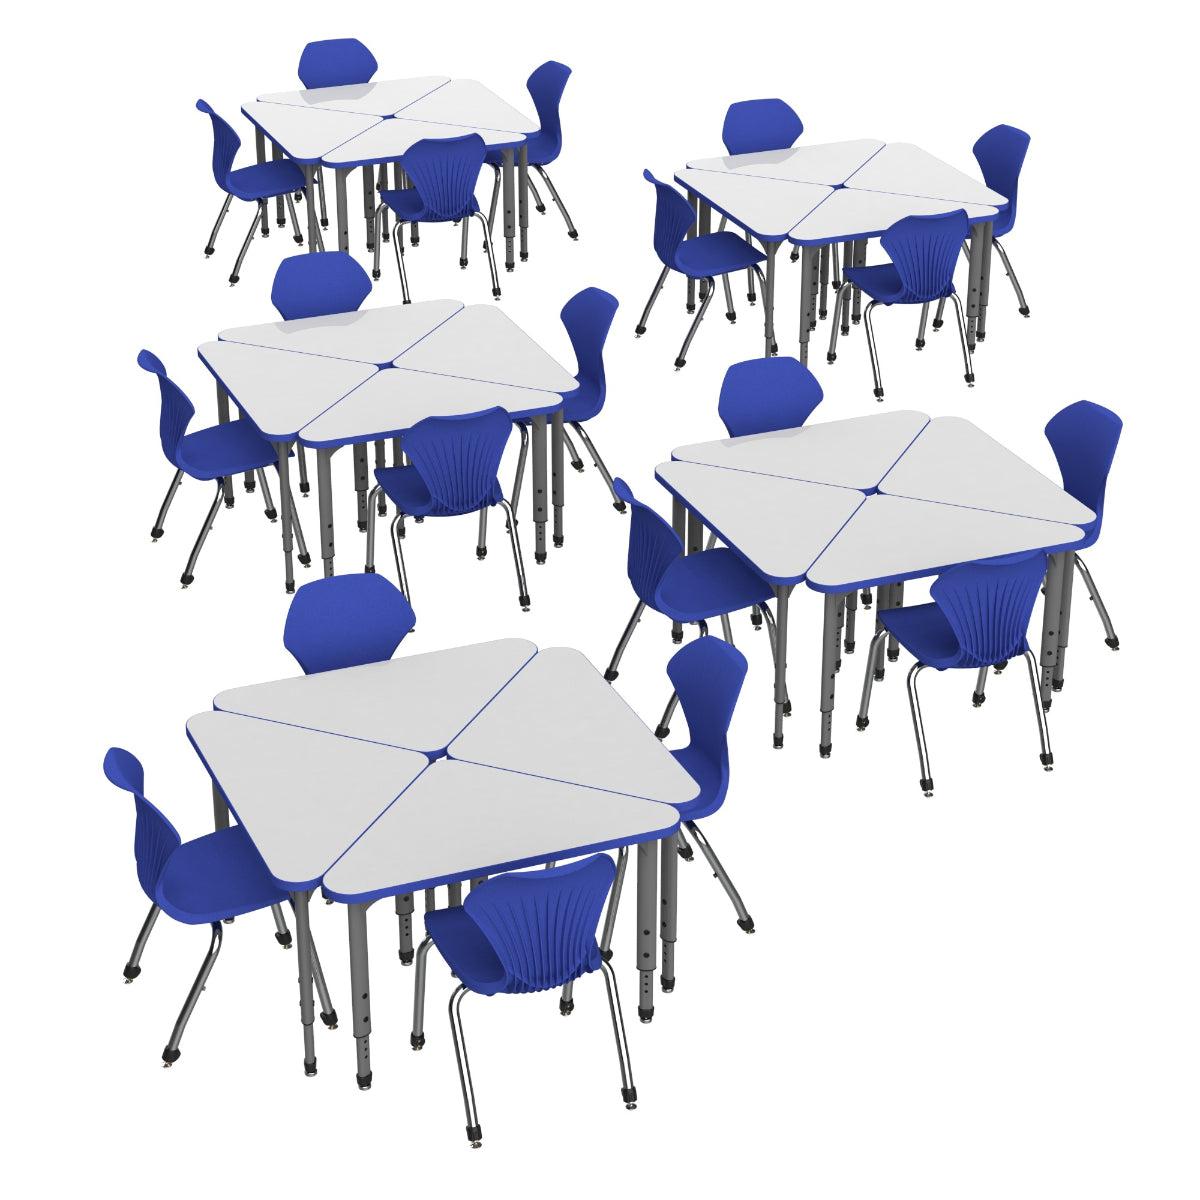 Apex White Dry Erase Classroom Desk and Chair Package, 20 Triangle Collaborative Student Desks with 20 Apex Stack Chairs